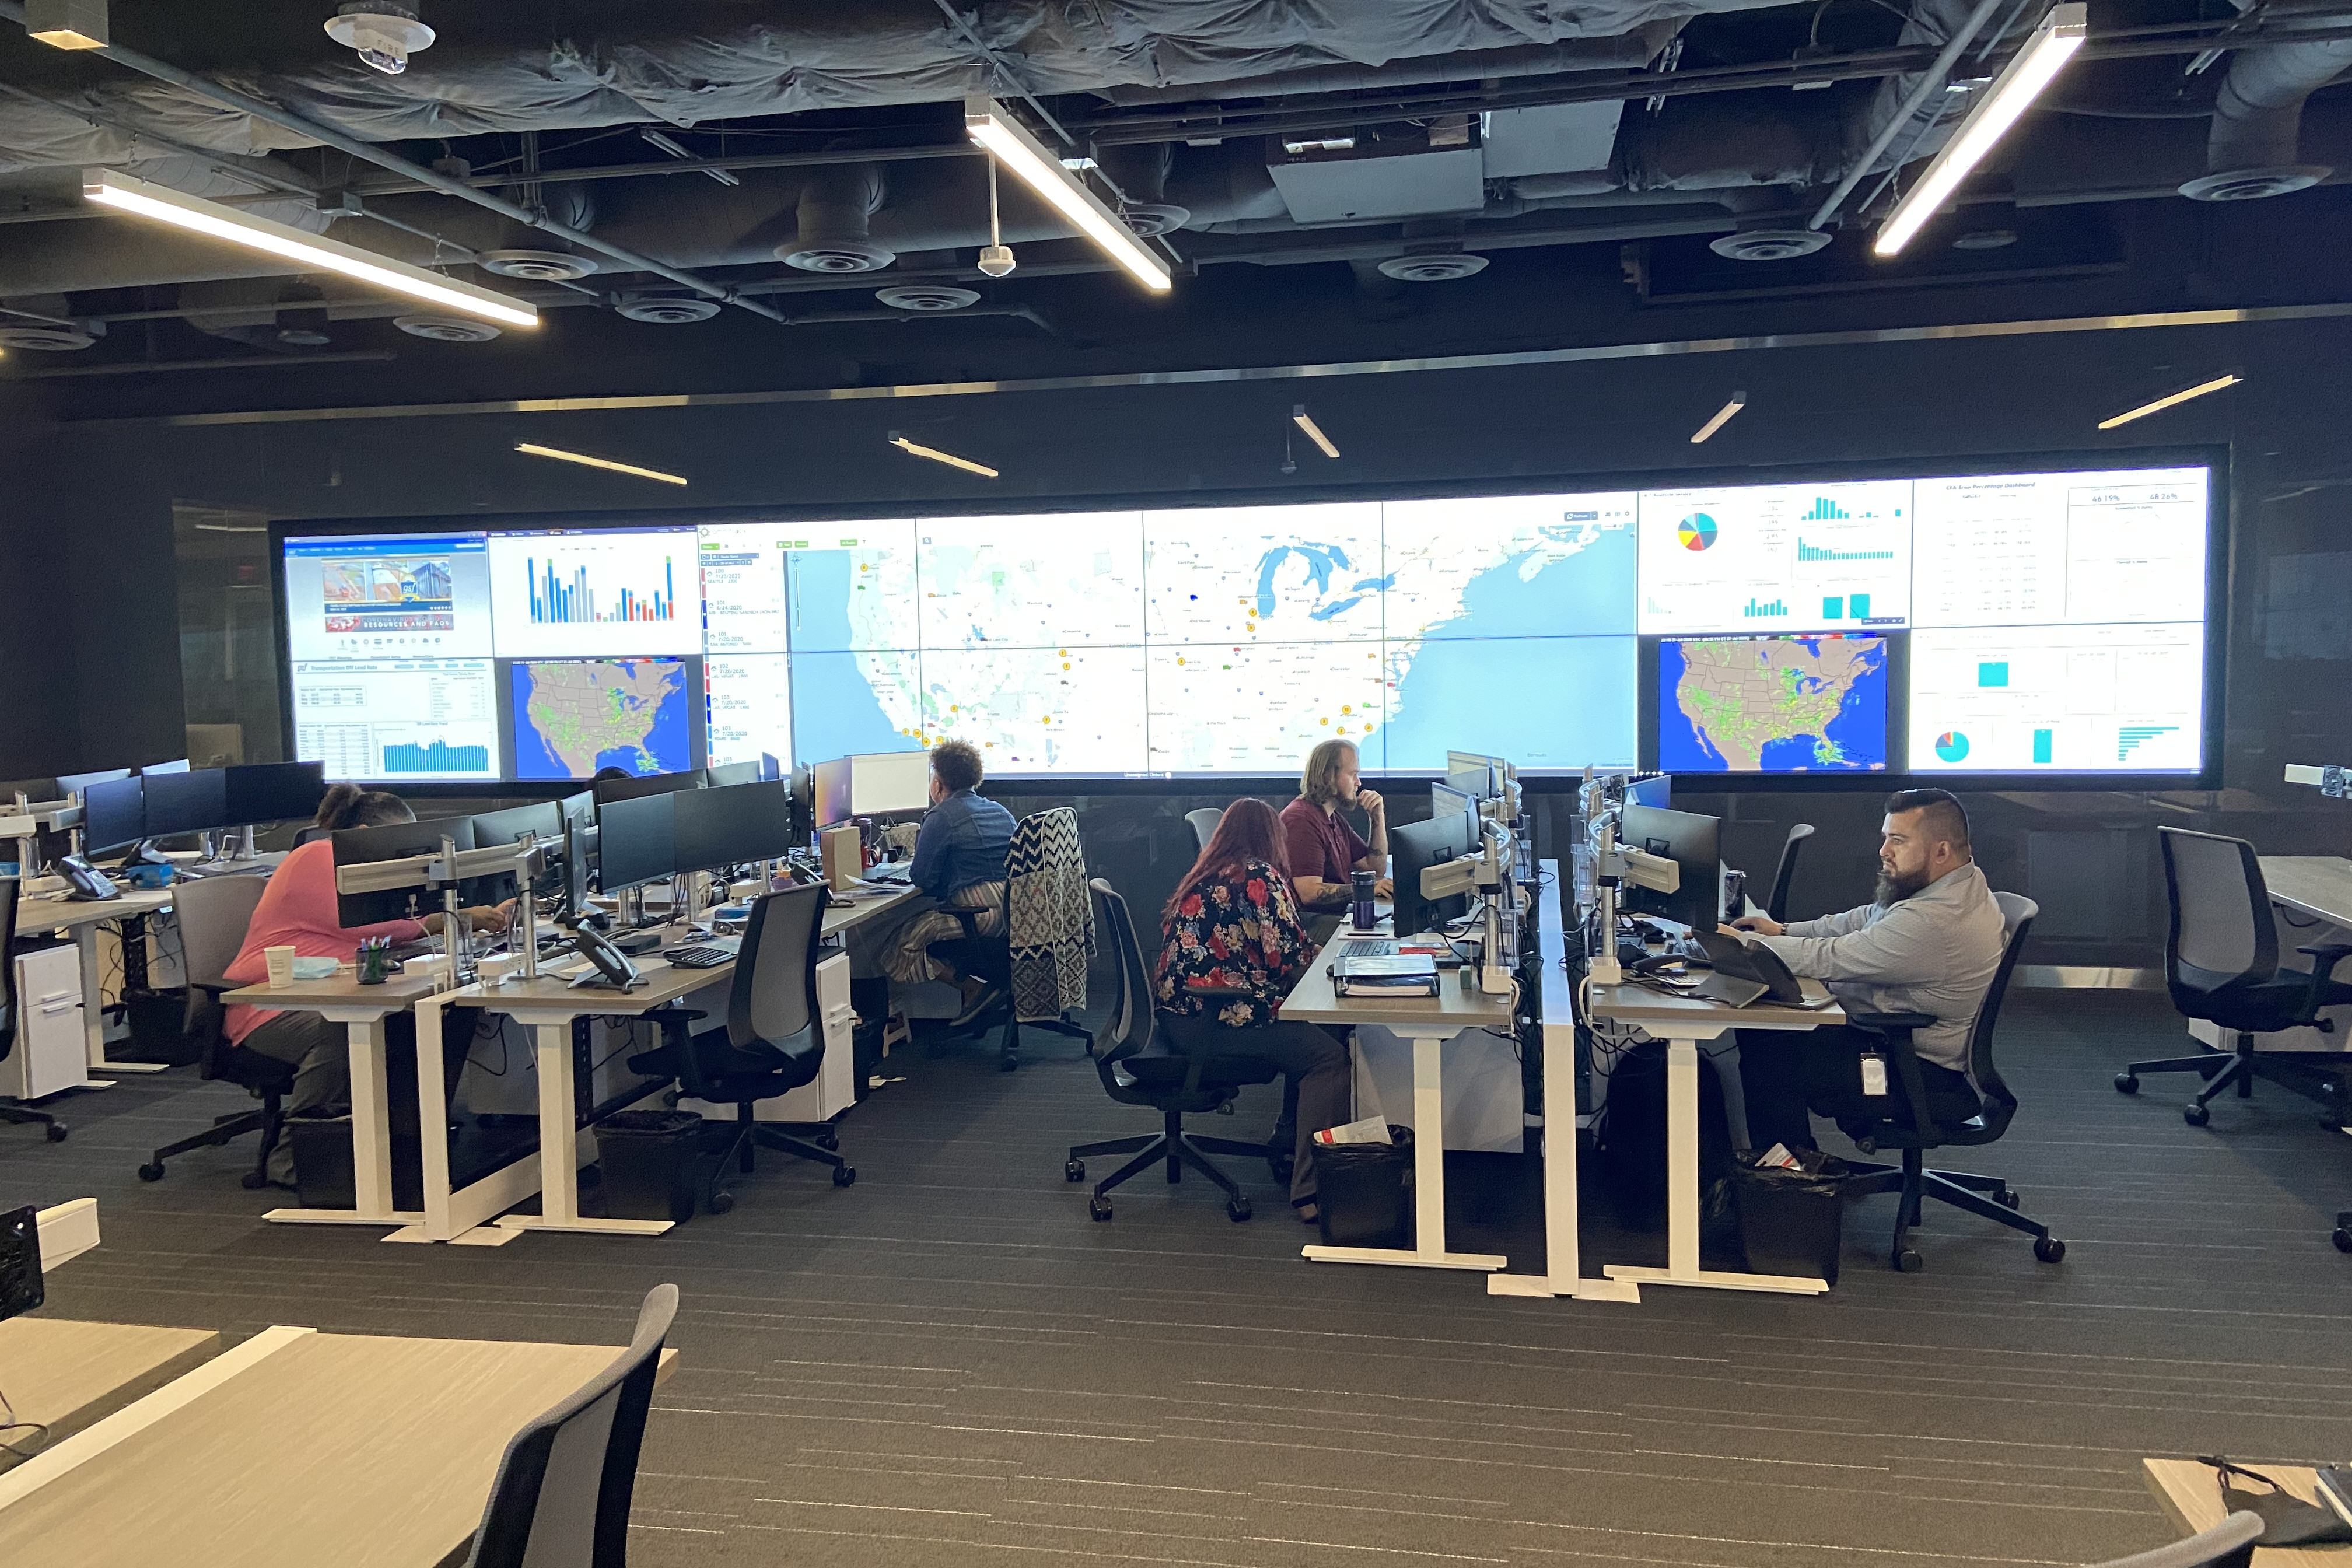 Inside an office, there are rows of employees sitting as desks looking at their computers. There are 16 tv screens at the front with various kinds of information on them